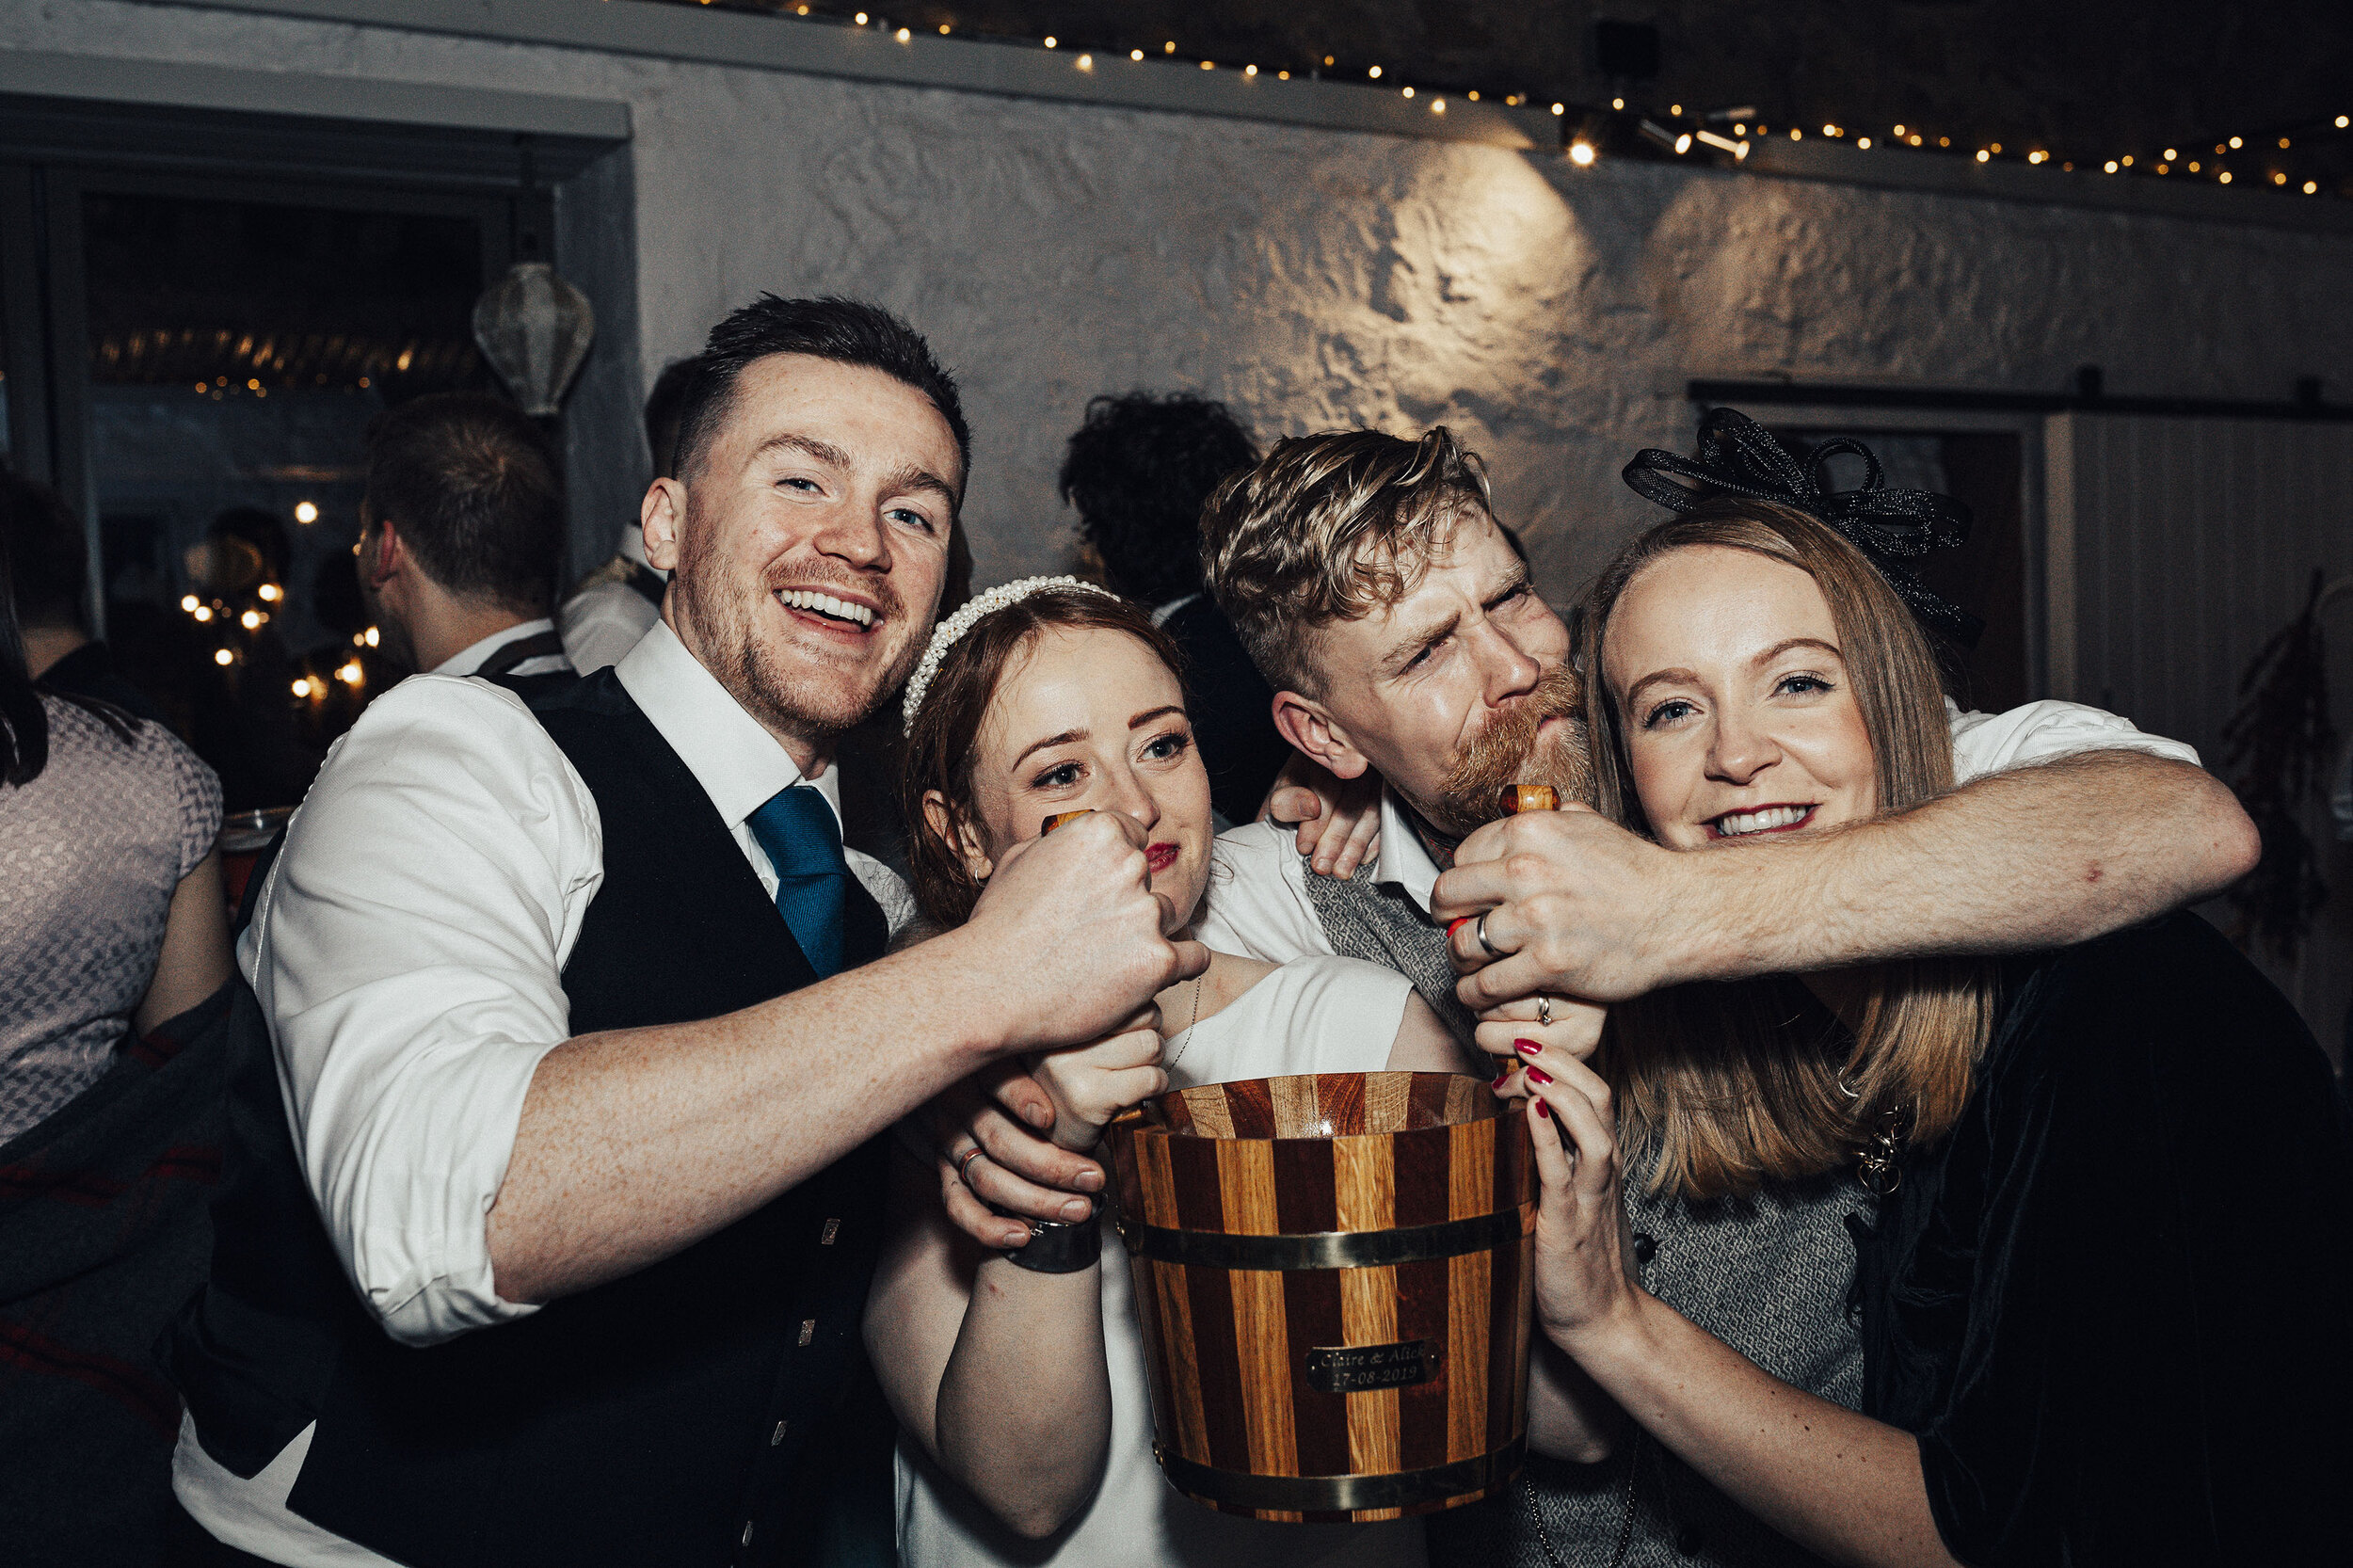 COW_SHED_CRAIL_WEDDING_PJ_PHILLIPS_PHOTOGRAPHY_172.jpg